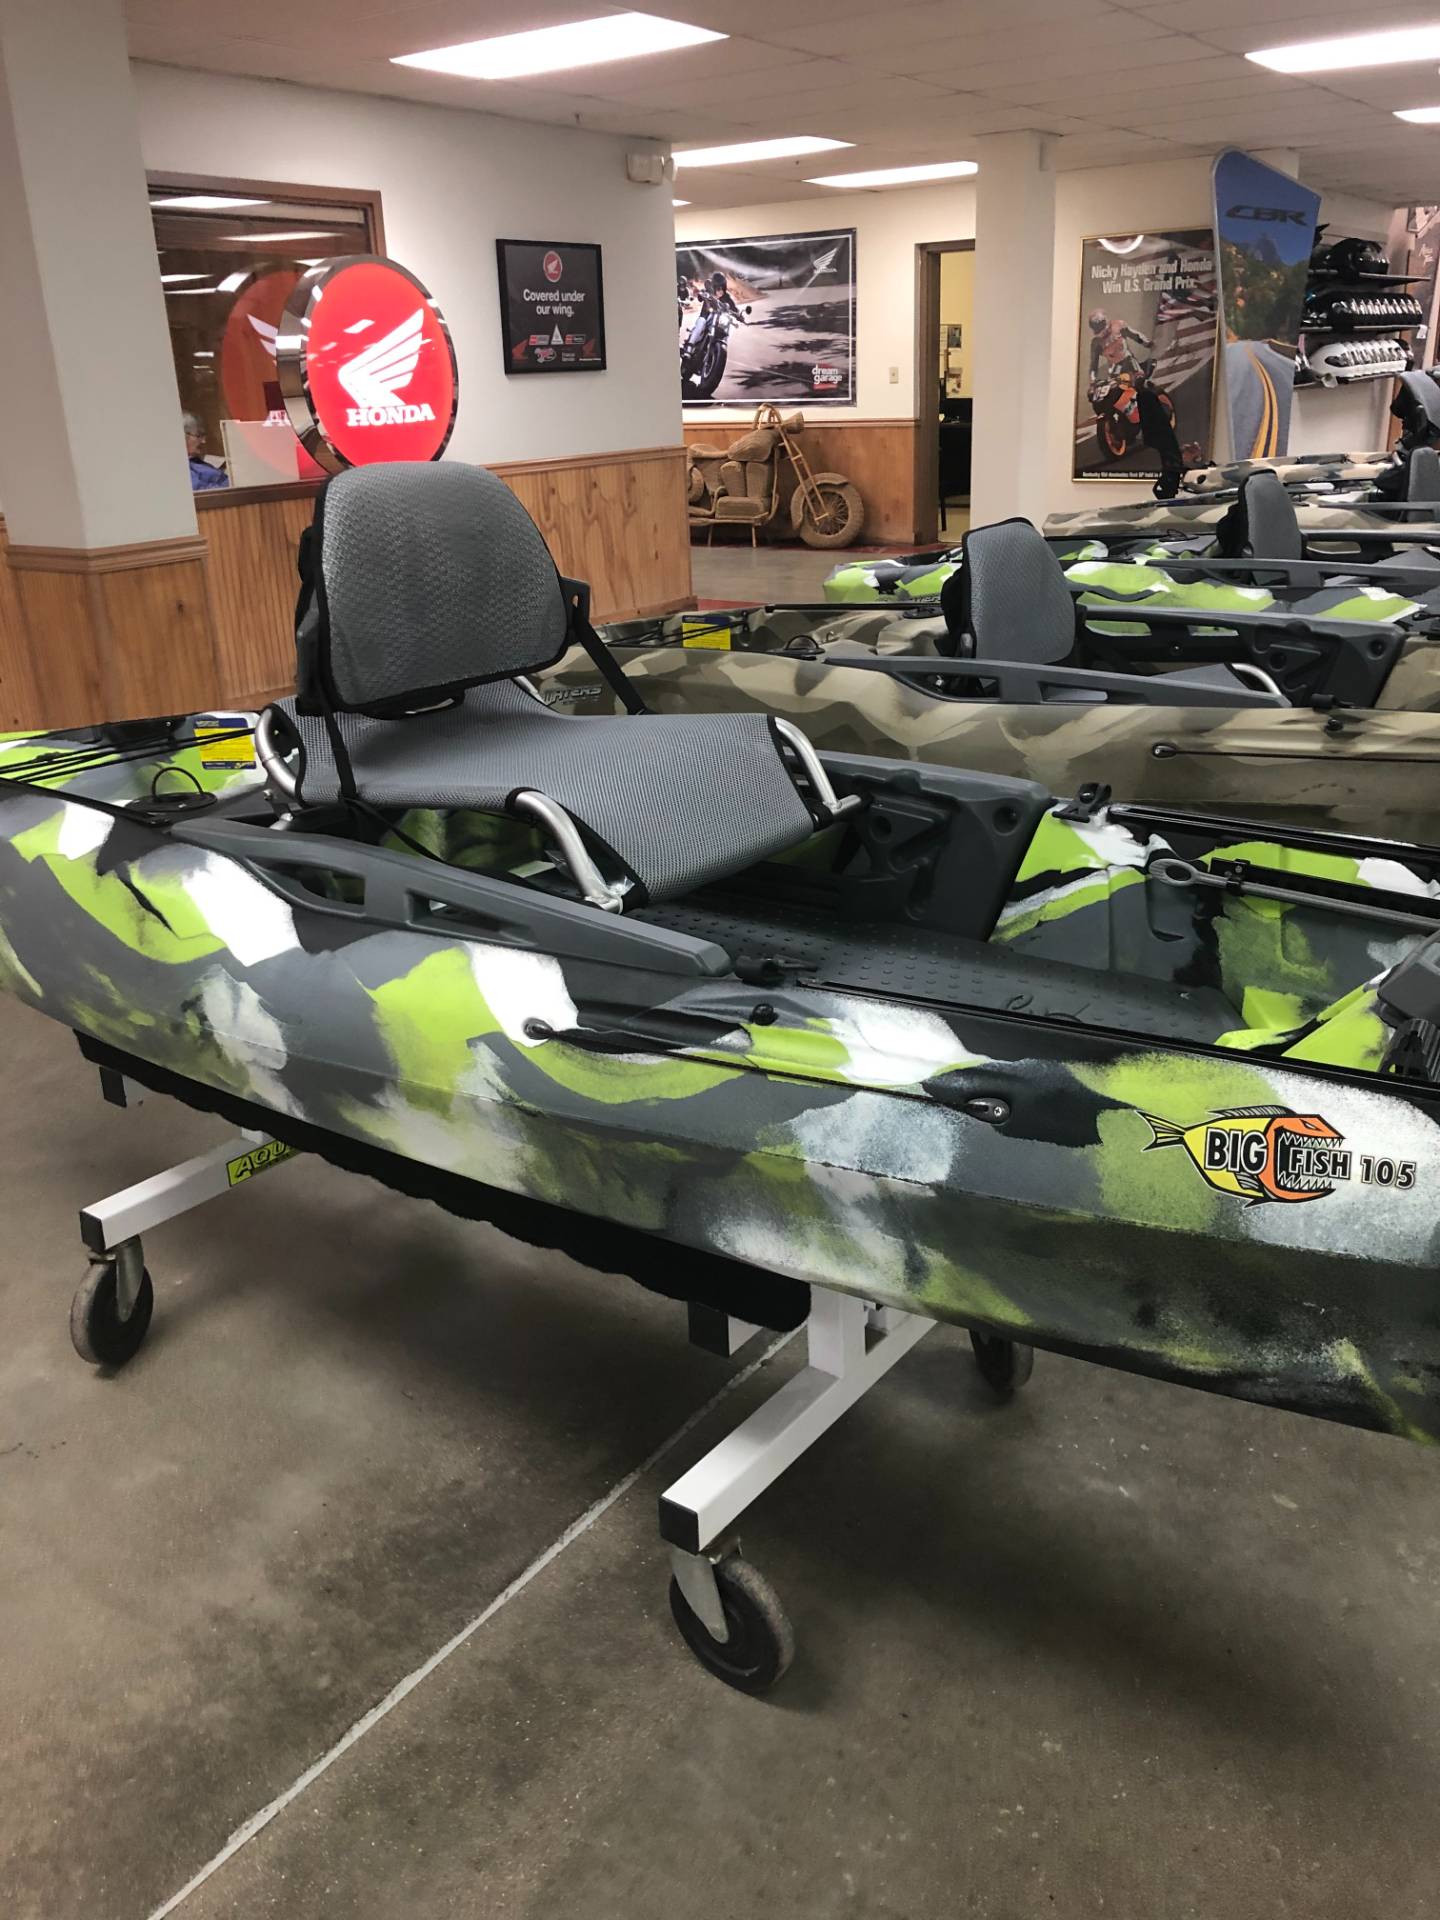 New 2021 3 WATERS KAYAKS BIG FISH 105 NonPowered Boats in